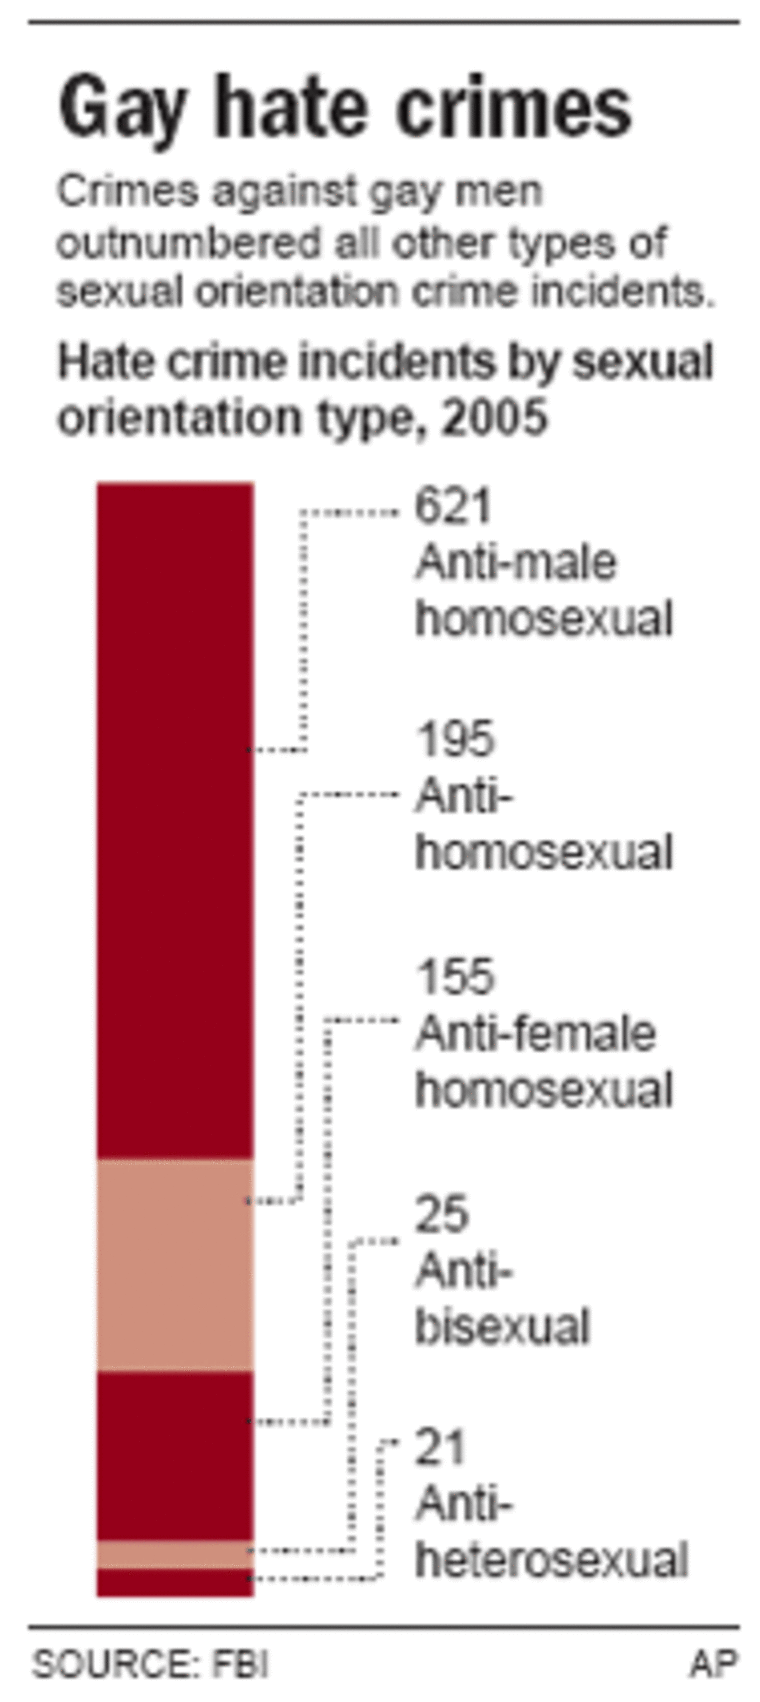 Males target of most gay hate crimes